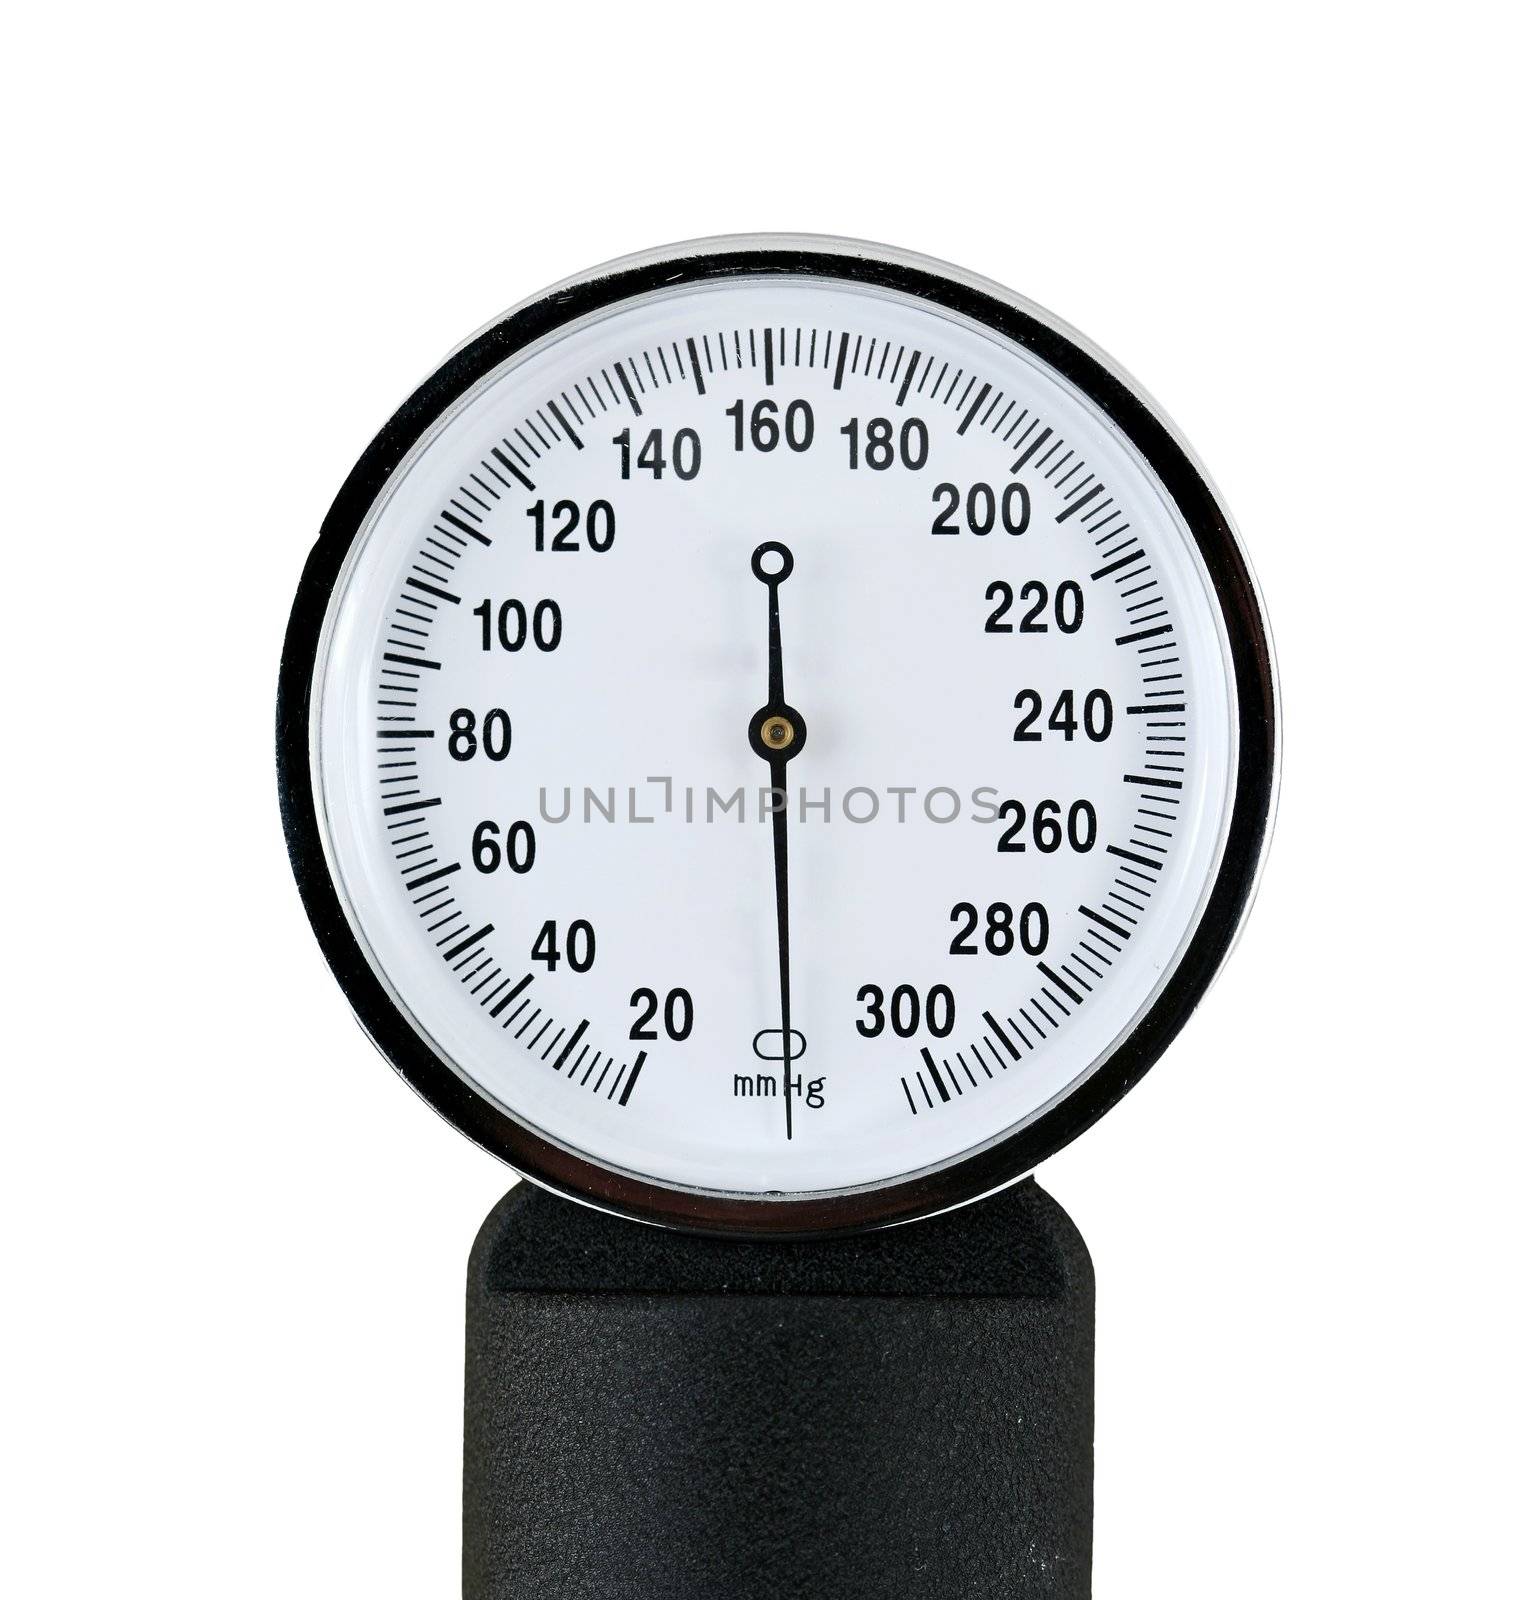 close up view of a sphygmomanometer